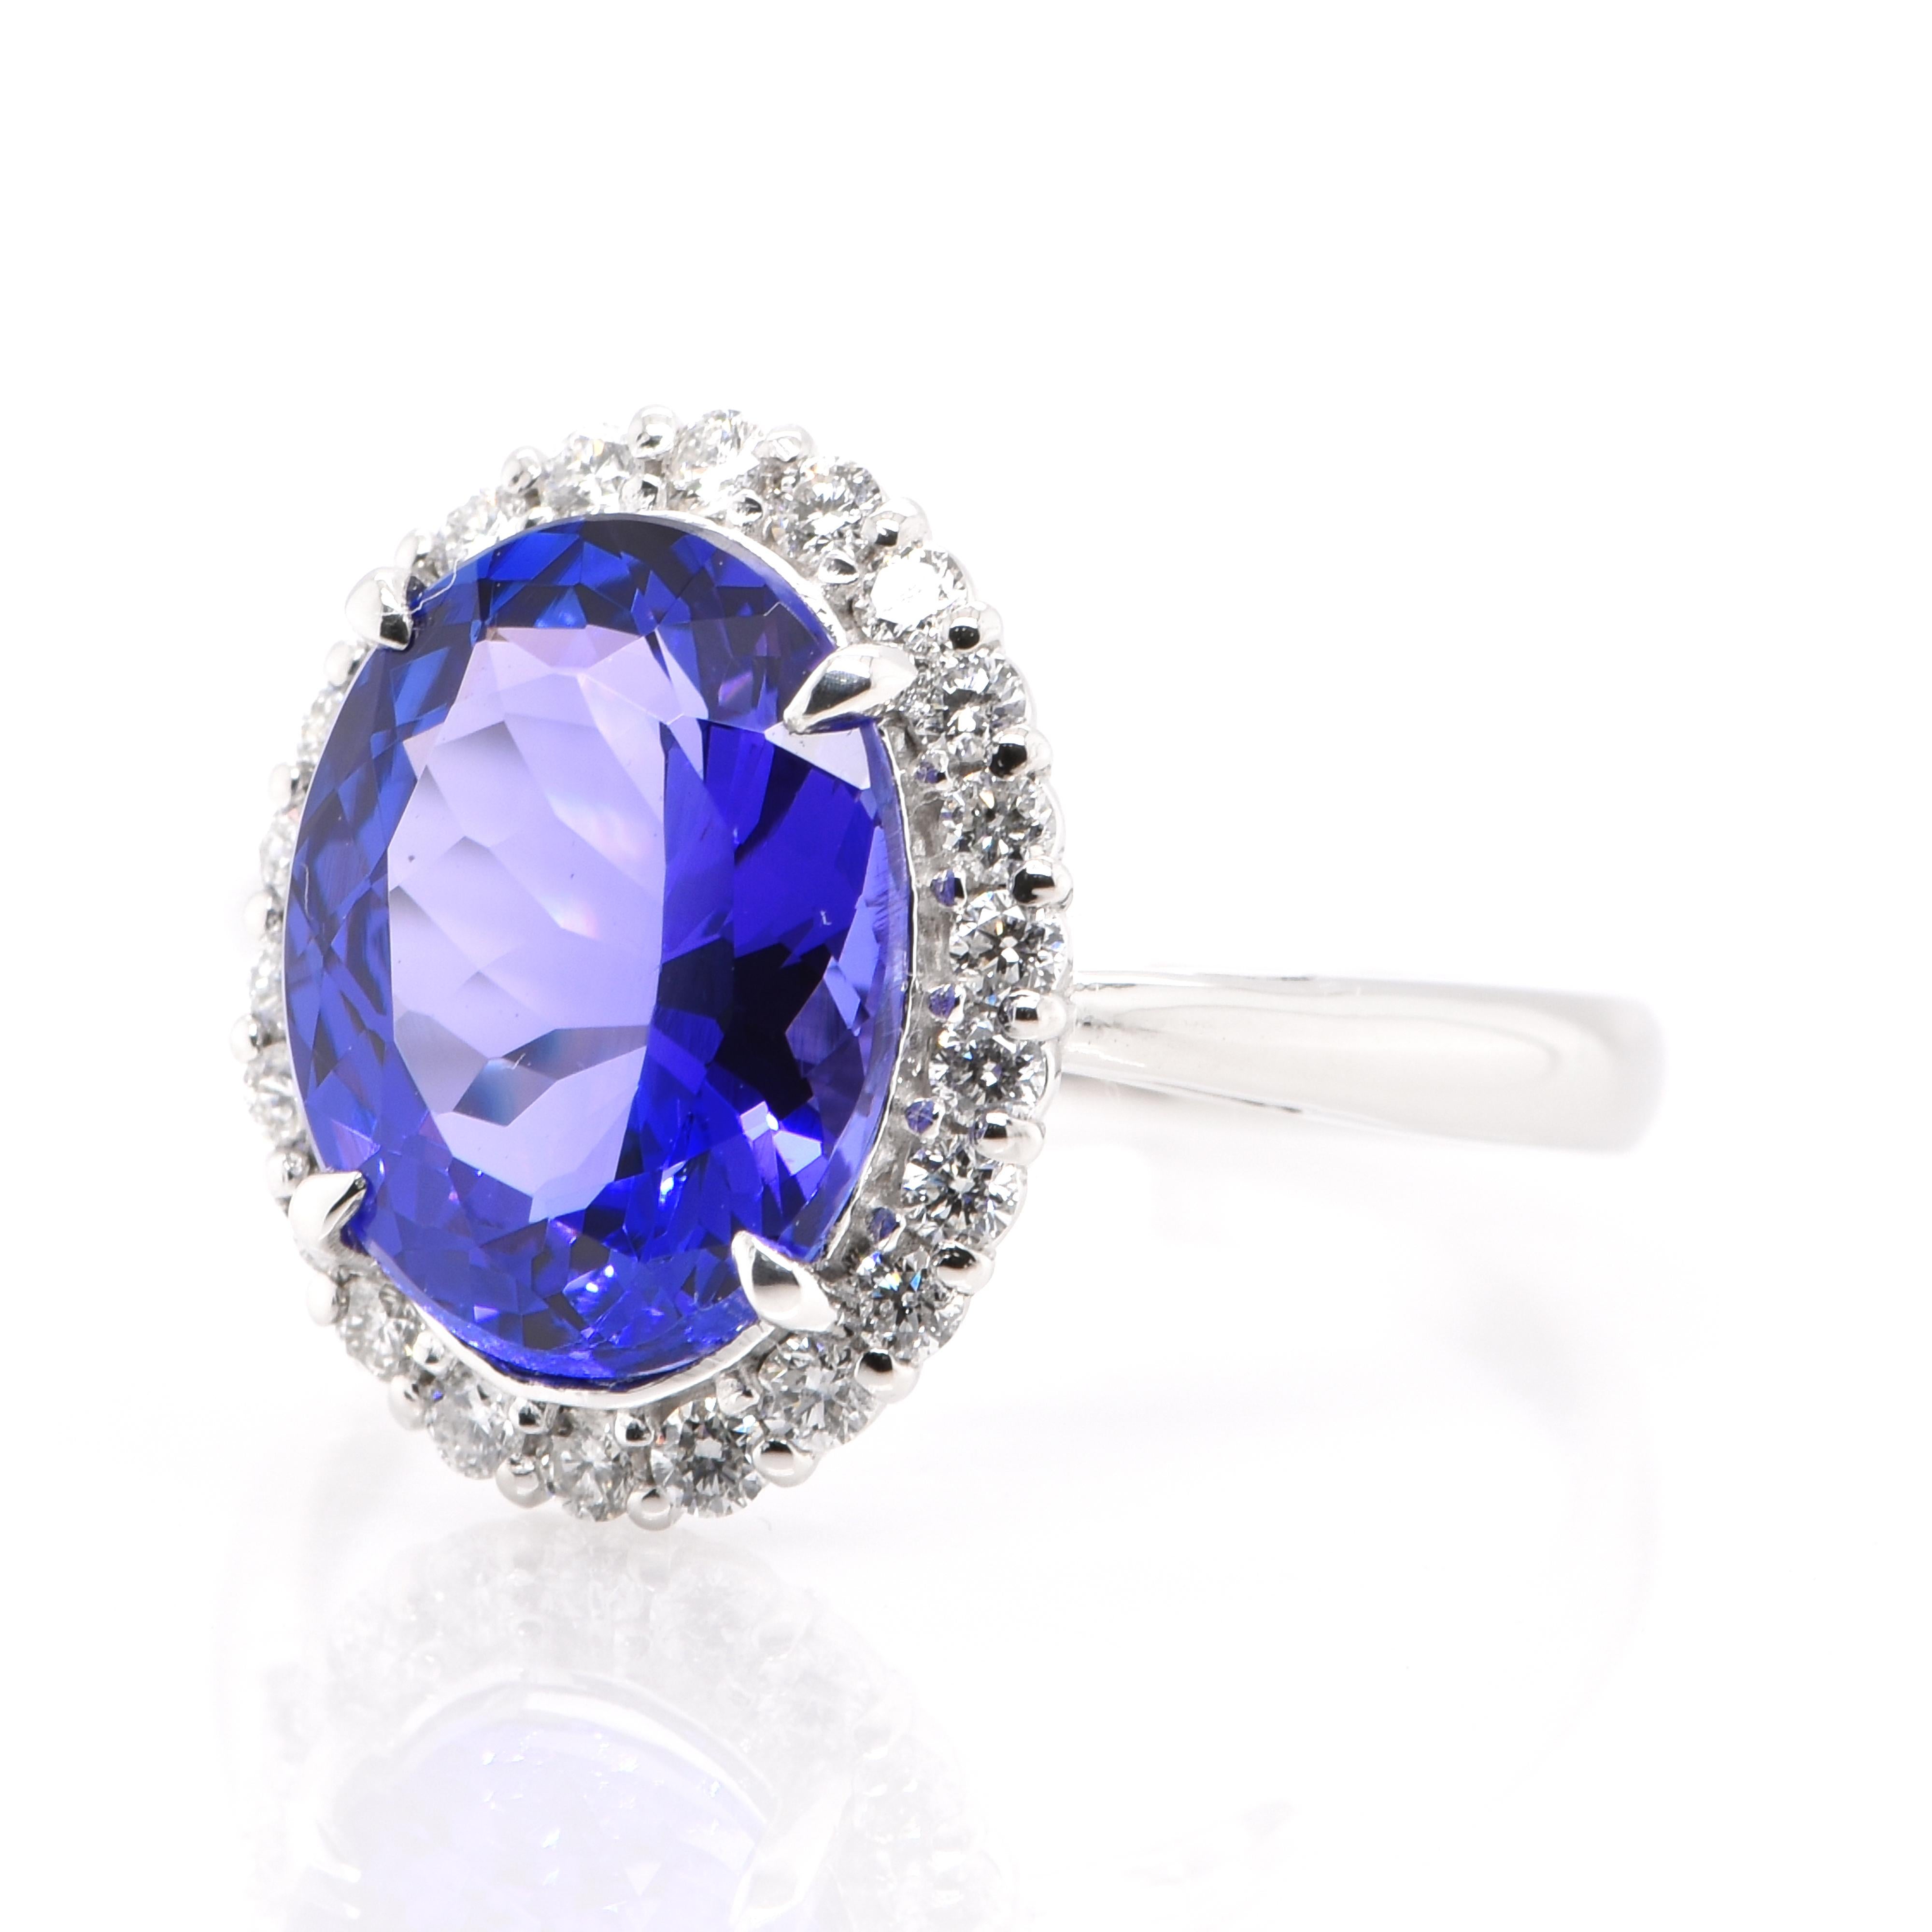 A beautiful Halo Ring featuring a 3.52 Carat, Natural, Tanzanite and 0.32 Carats of Diamond Accents set in Platinum. Tanzanite's name was given by Tiffany and Co after its only known source: Tanzania. Tanzanite displays beautiful pleochroic colors